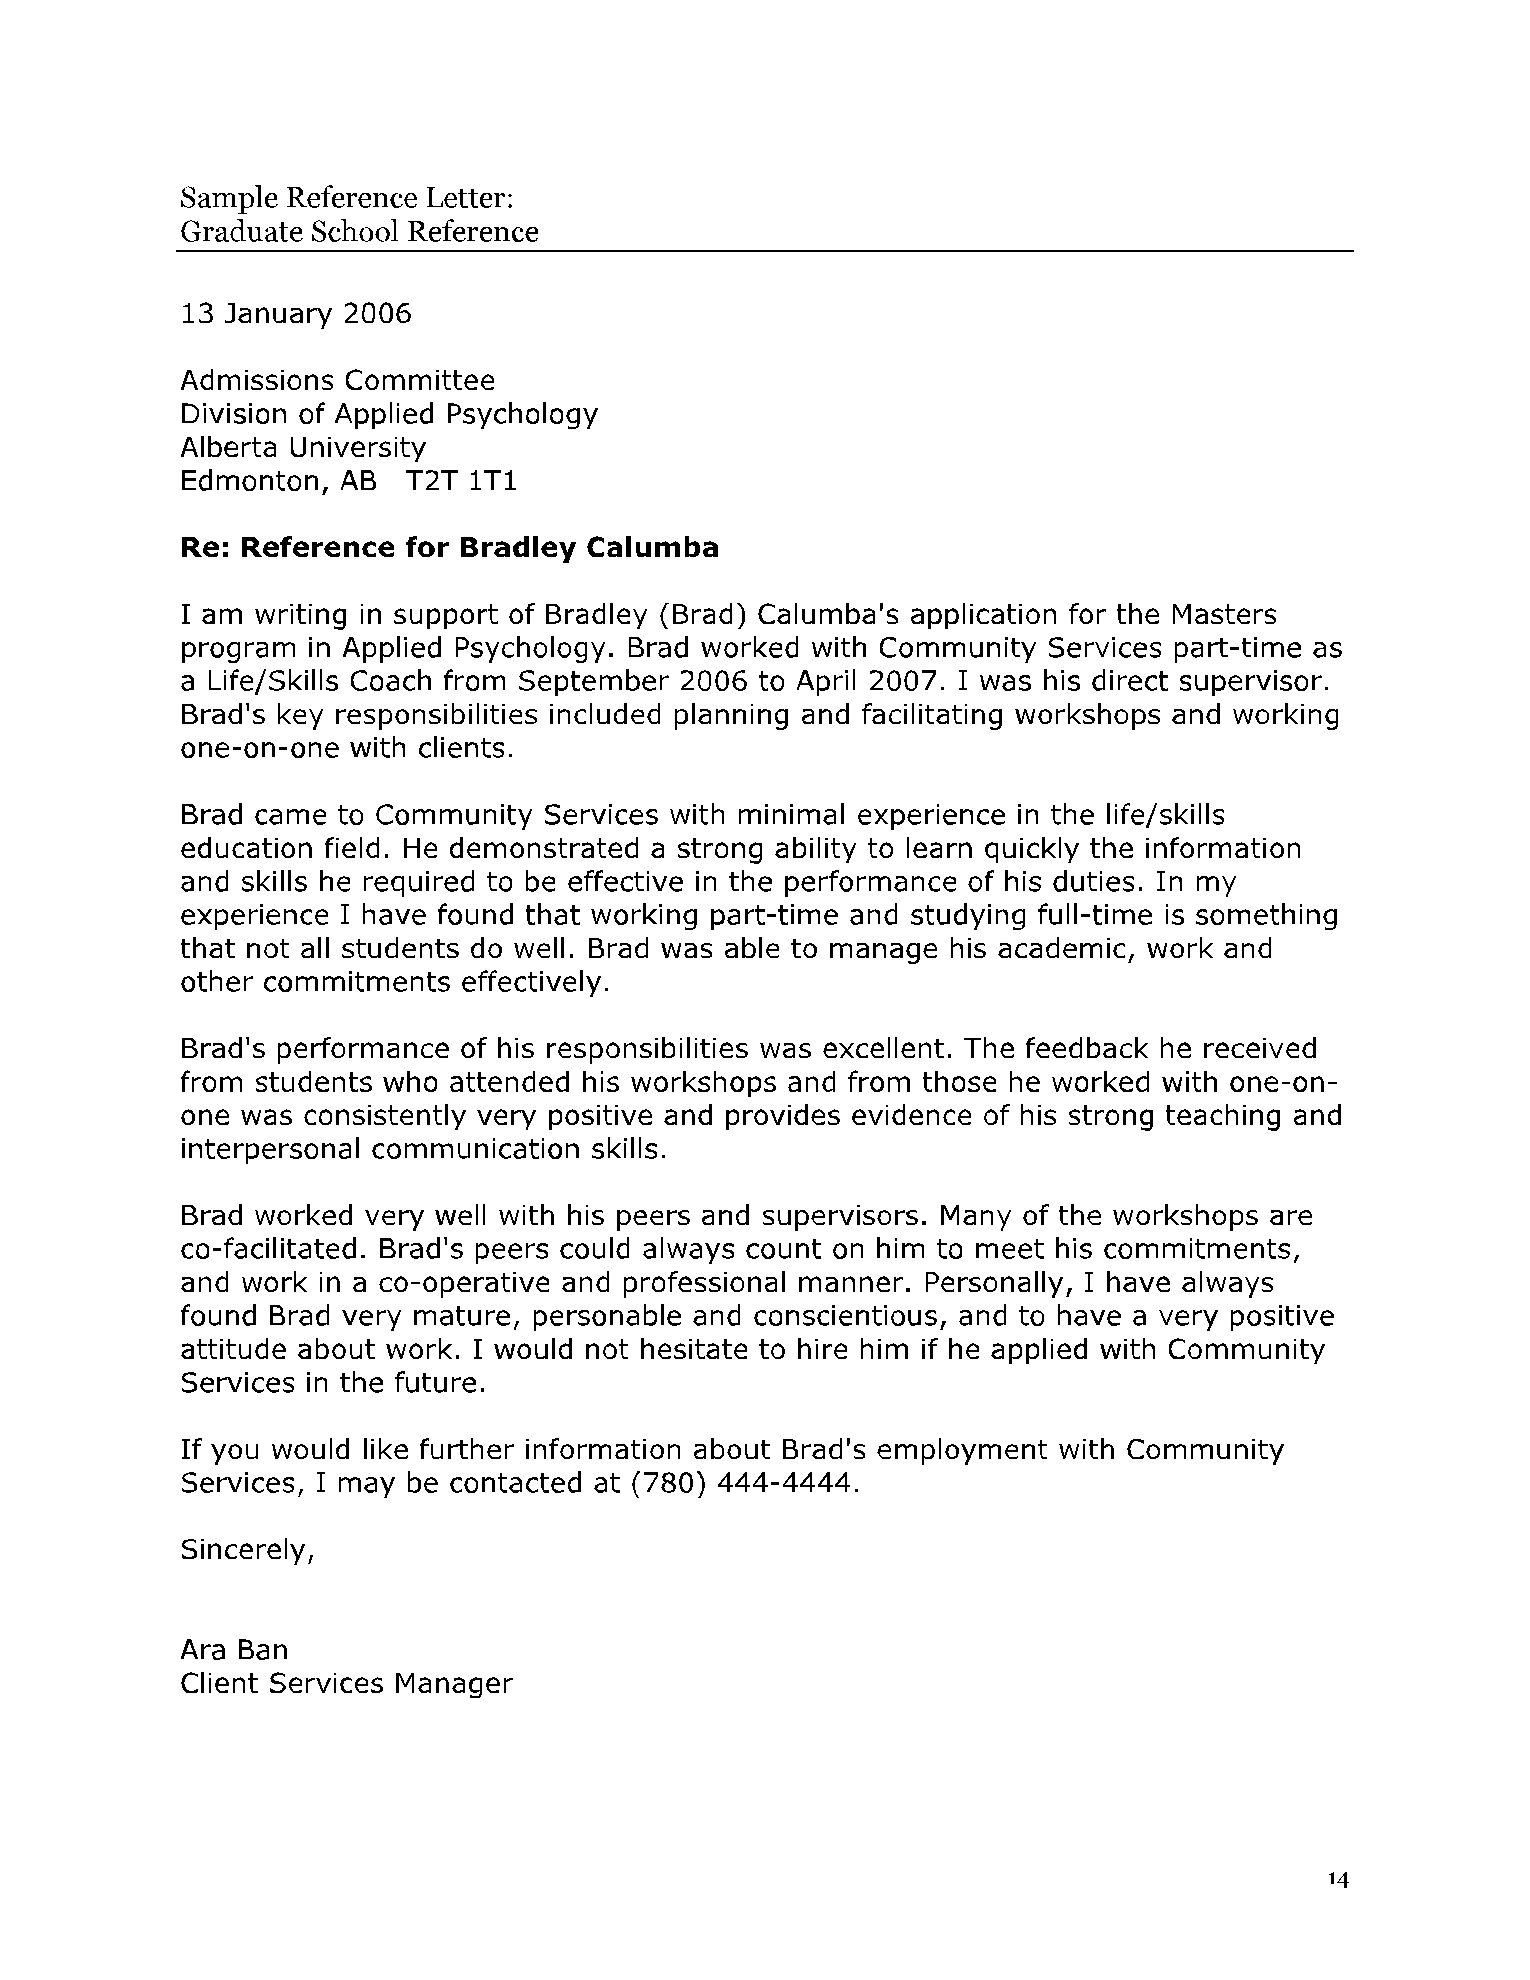 Letter of Recommendation for Immigration 14